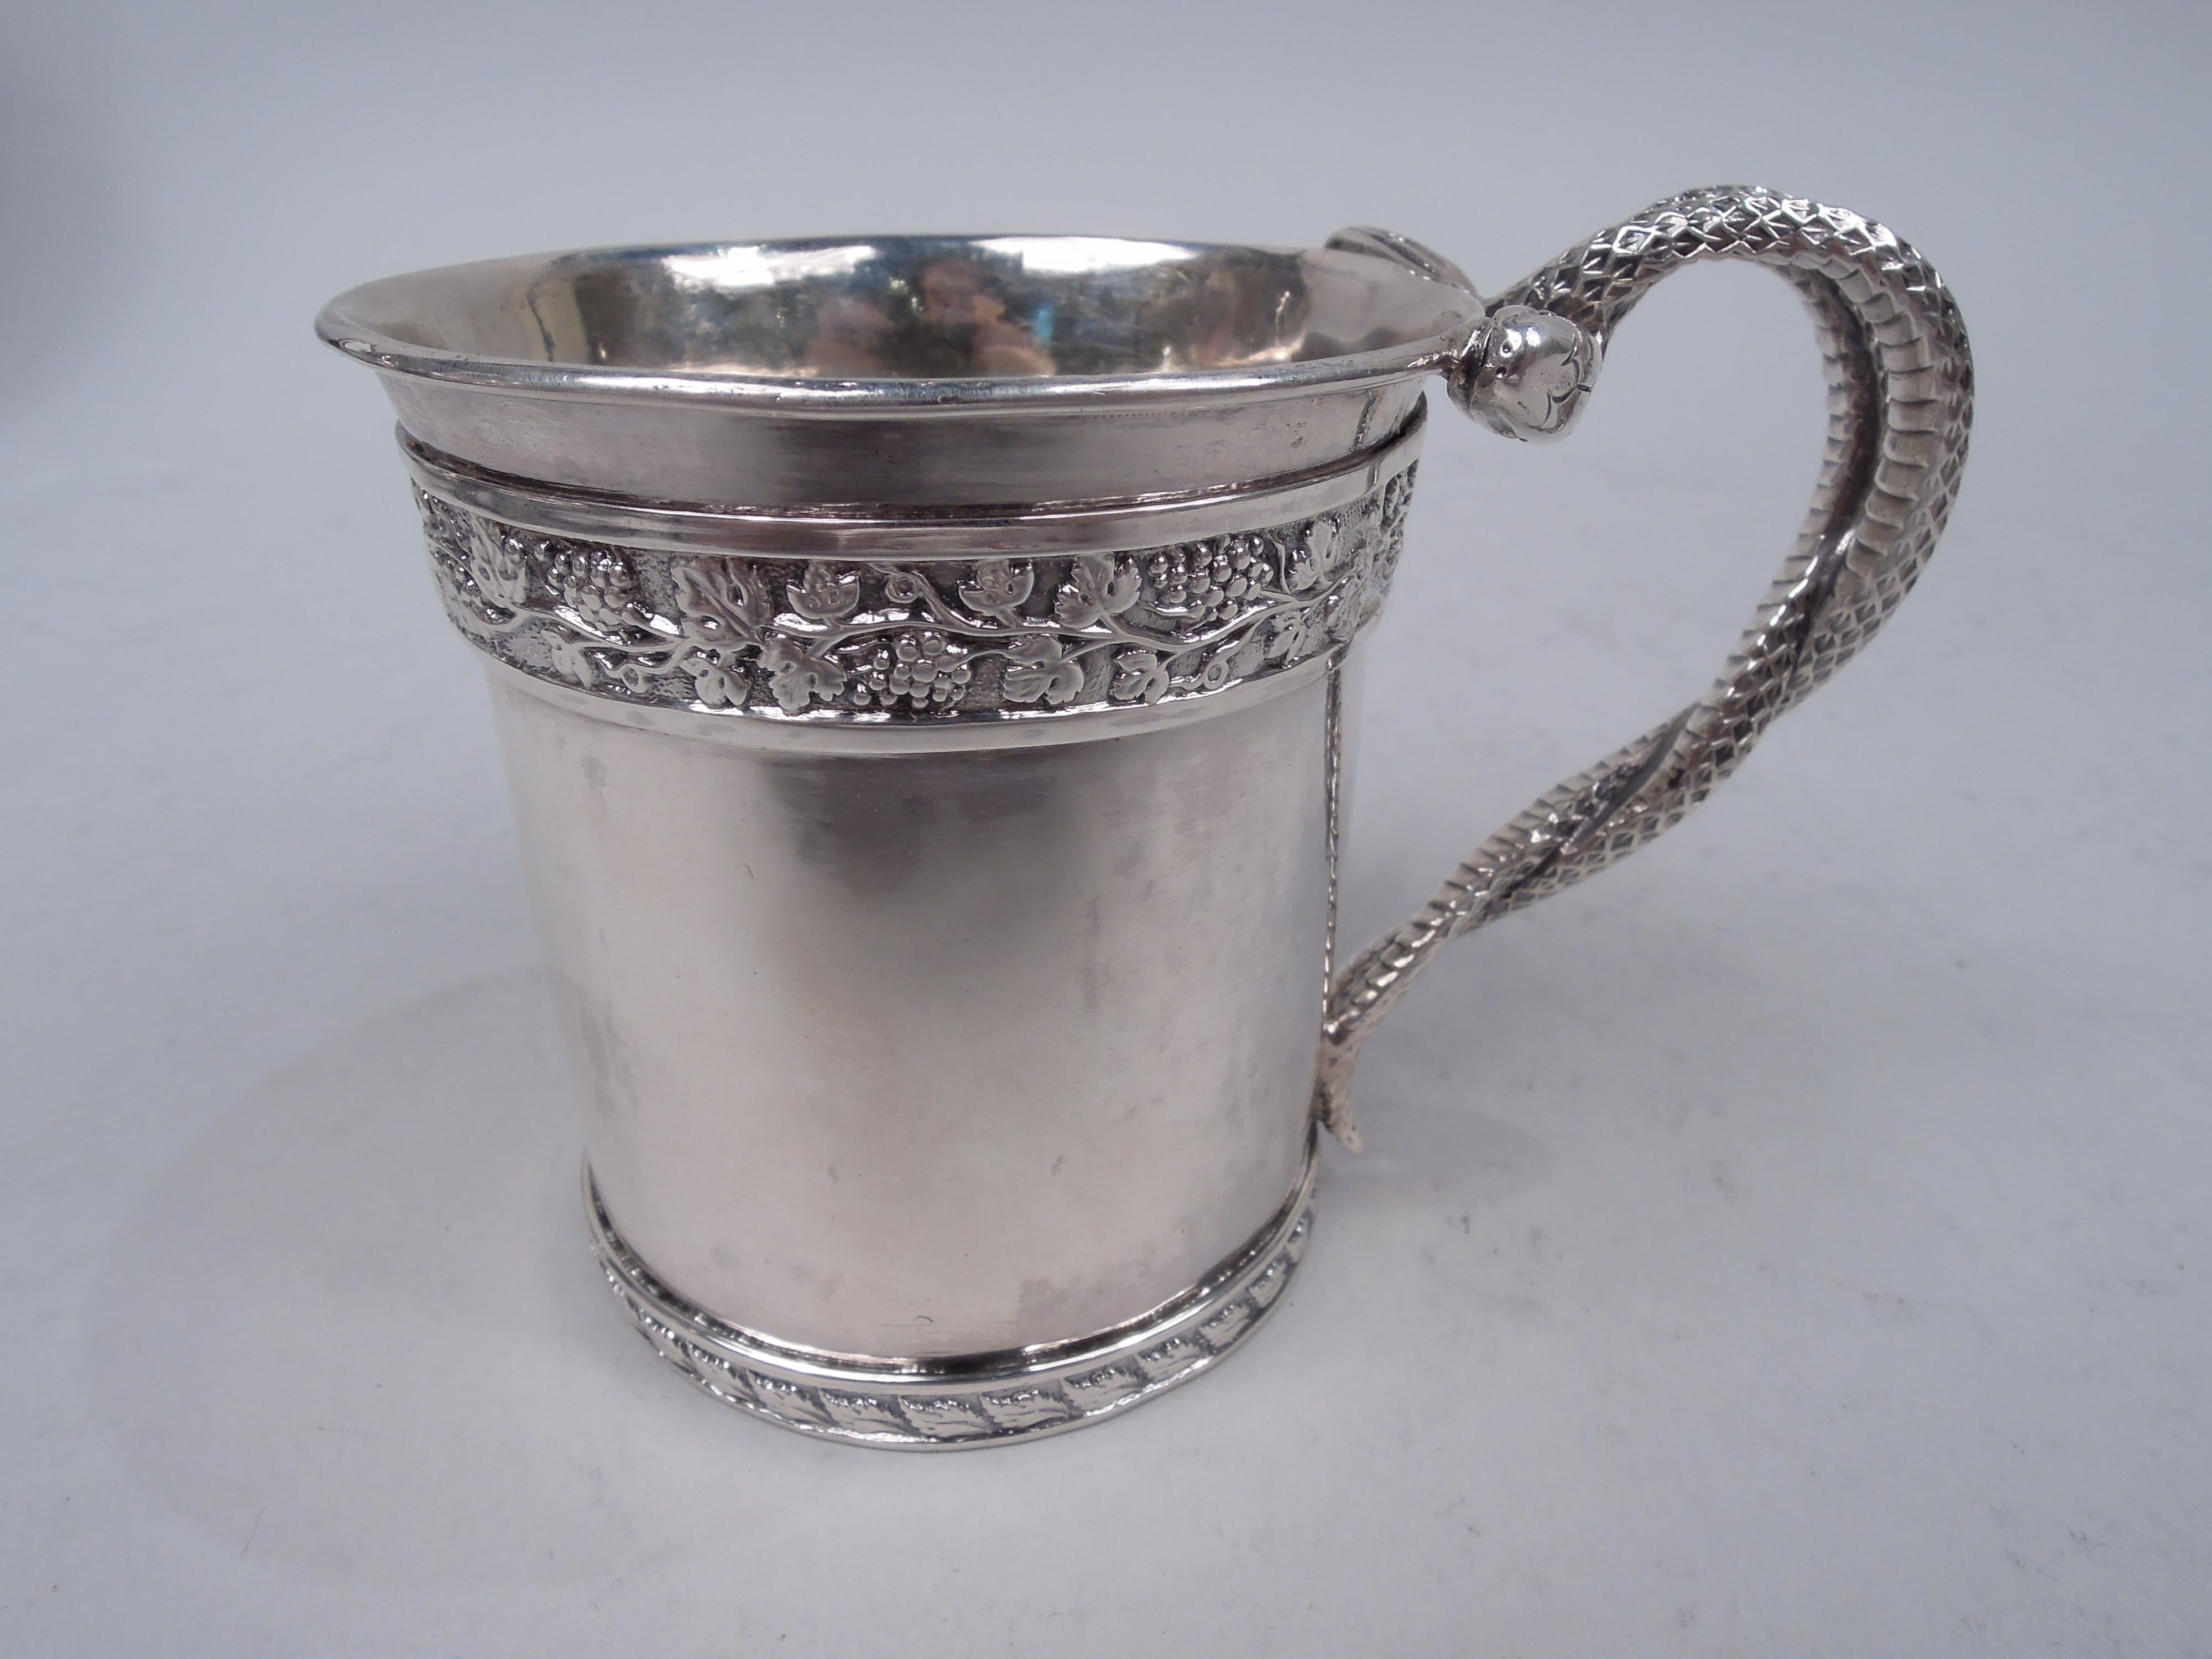 George III sterling silver baby cup. Made by William Bennett in London 1811. Flared rim with low-relief fruiting grapevine border; leaf border at bottom. Cast handle in form of two snakes with entwined scaly bodies and bead-eyed heads. Gilt-washed